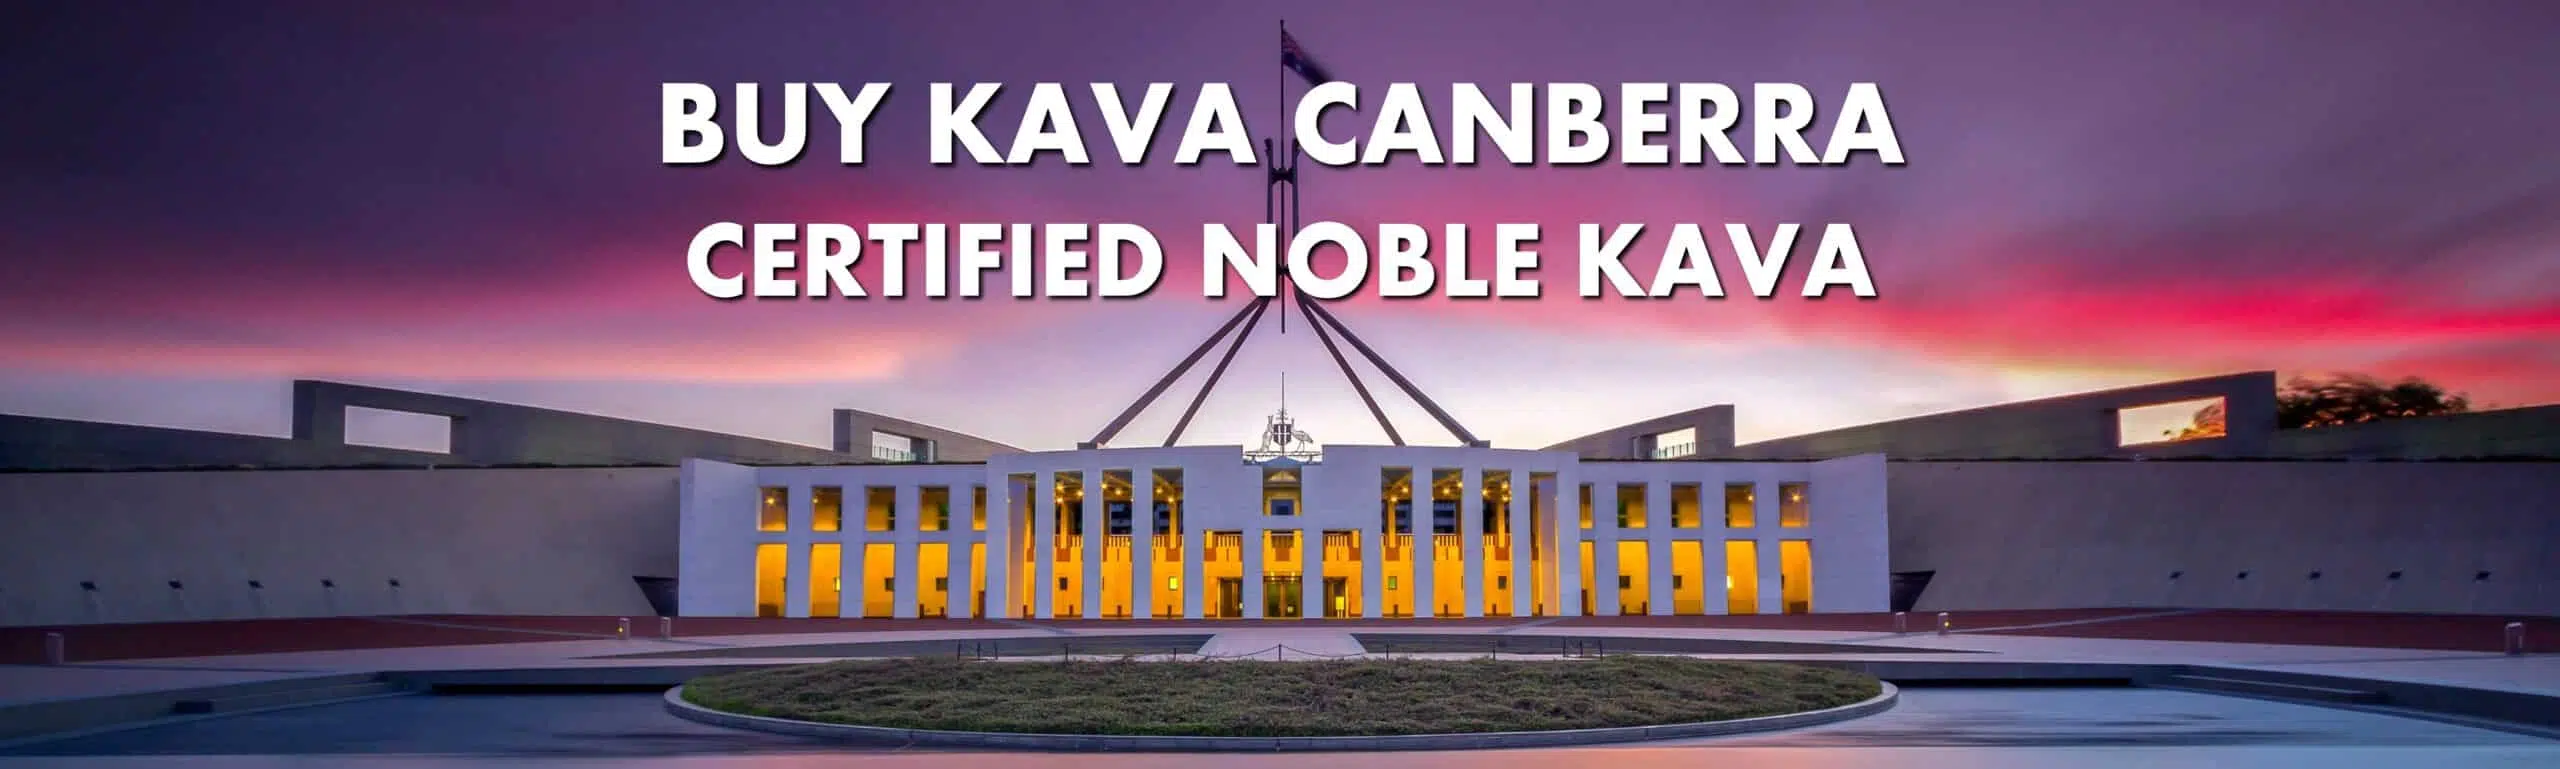 Parliament House in Canberra ACT with caption Buy Kava Canberra Certified Noble Kava